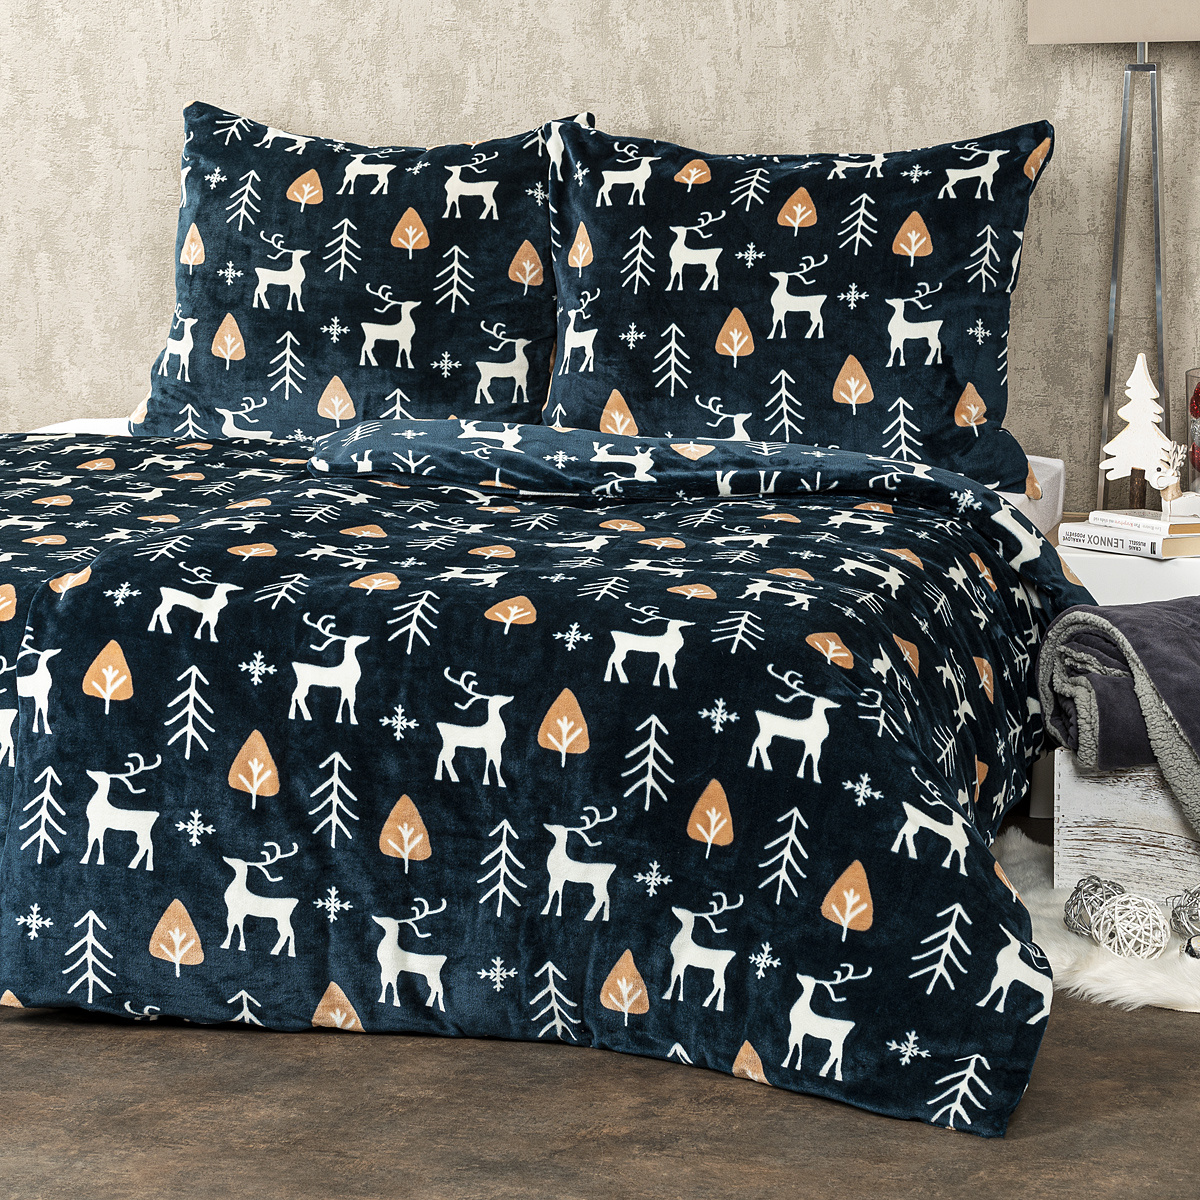 Lenjerie pat 2 pers. 4Home Nordic Deer microflanel, 160 x 200 cm, 2 buc. 70 x 80 cm 4Home